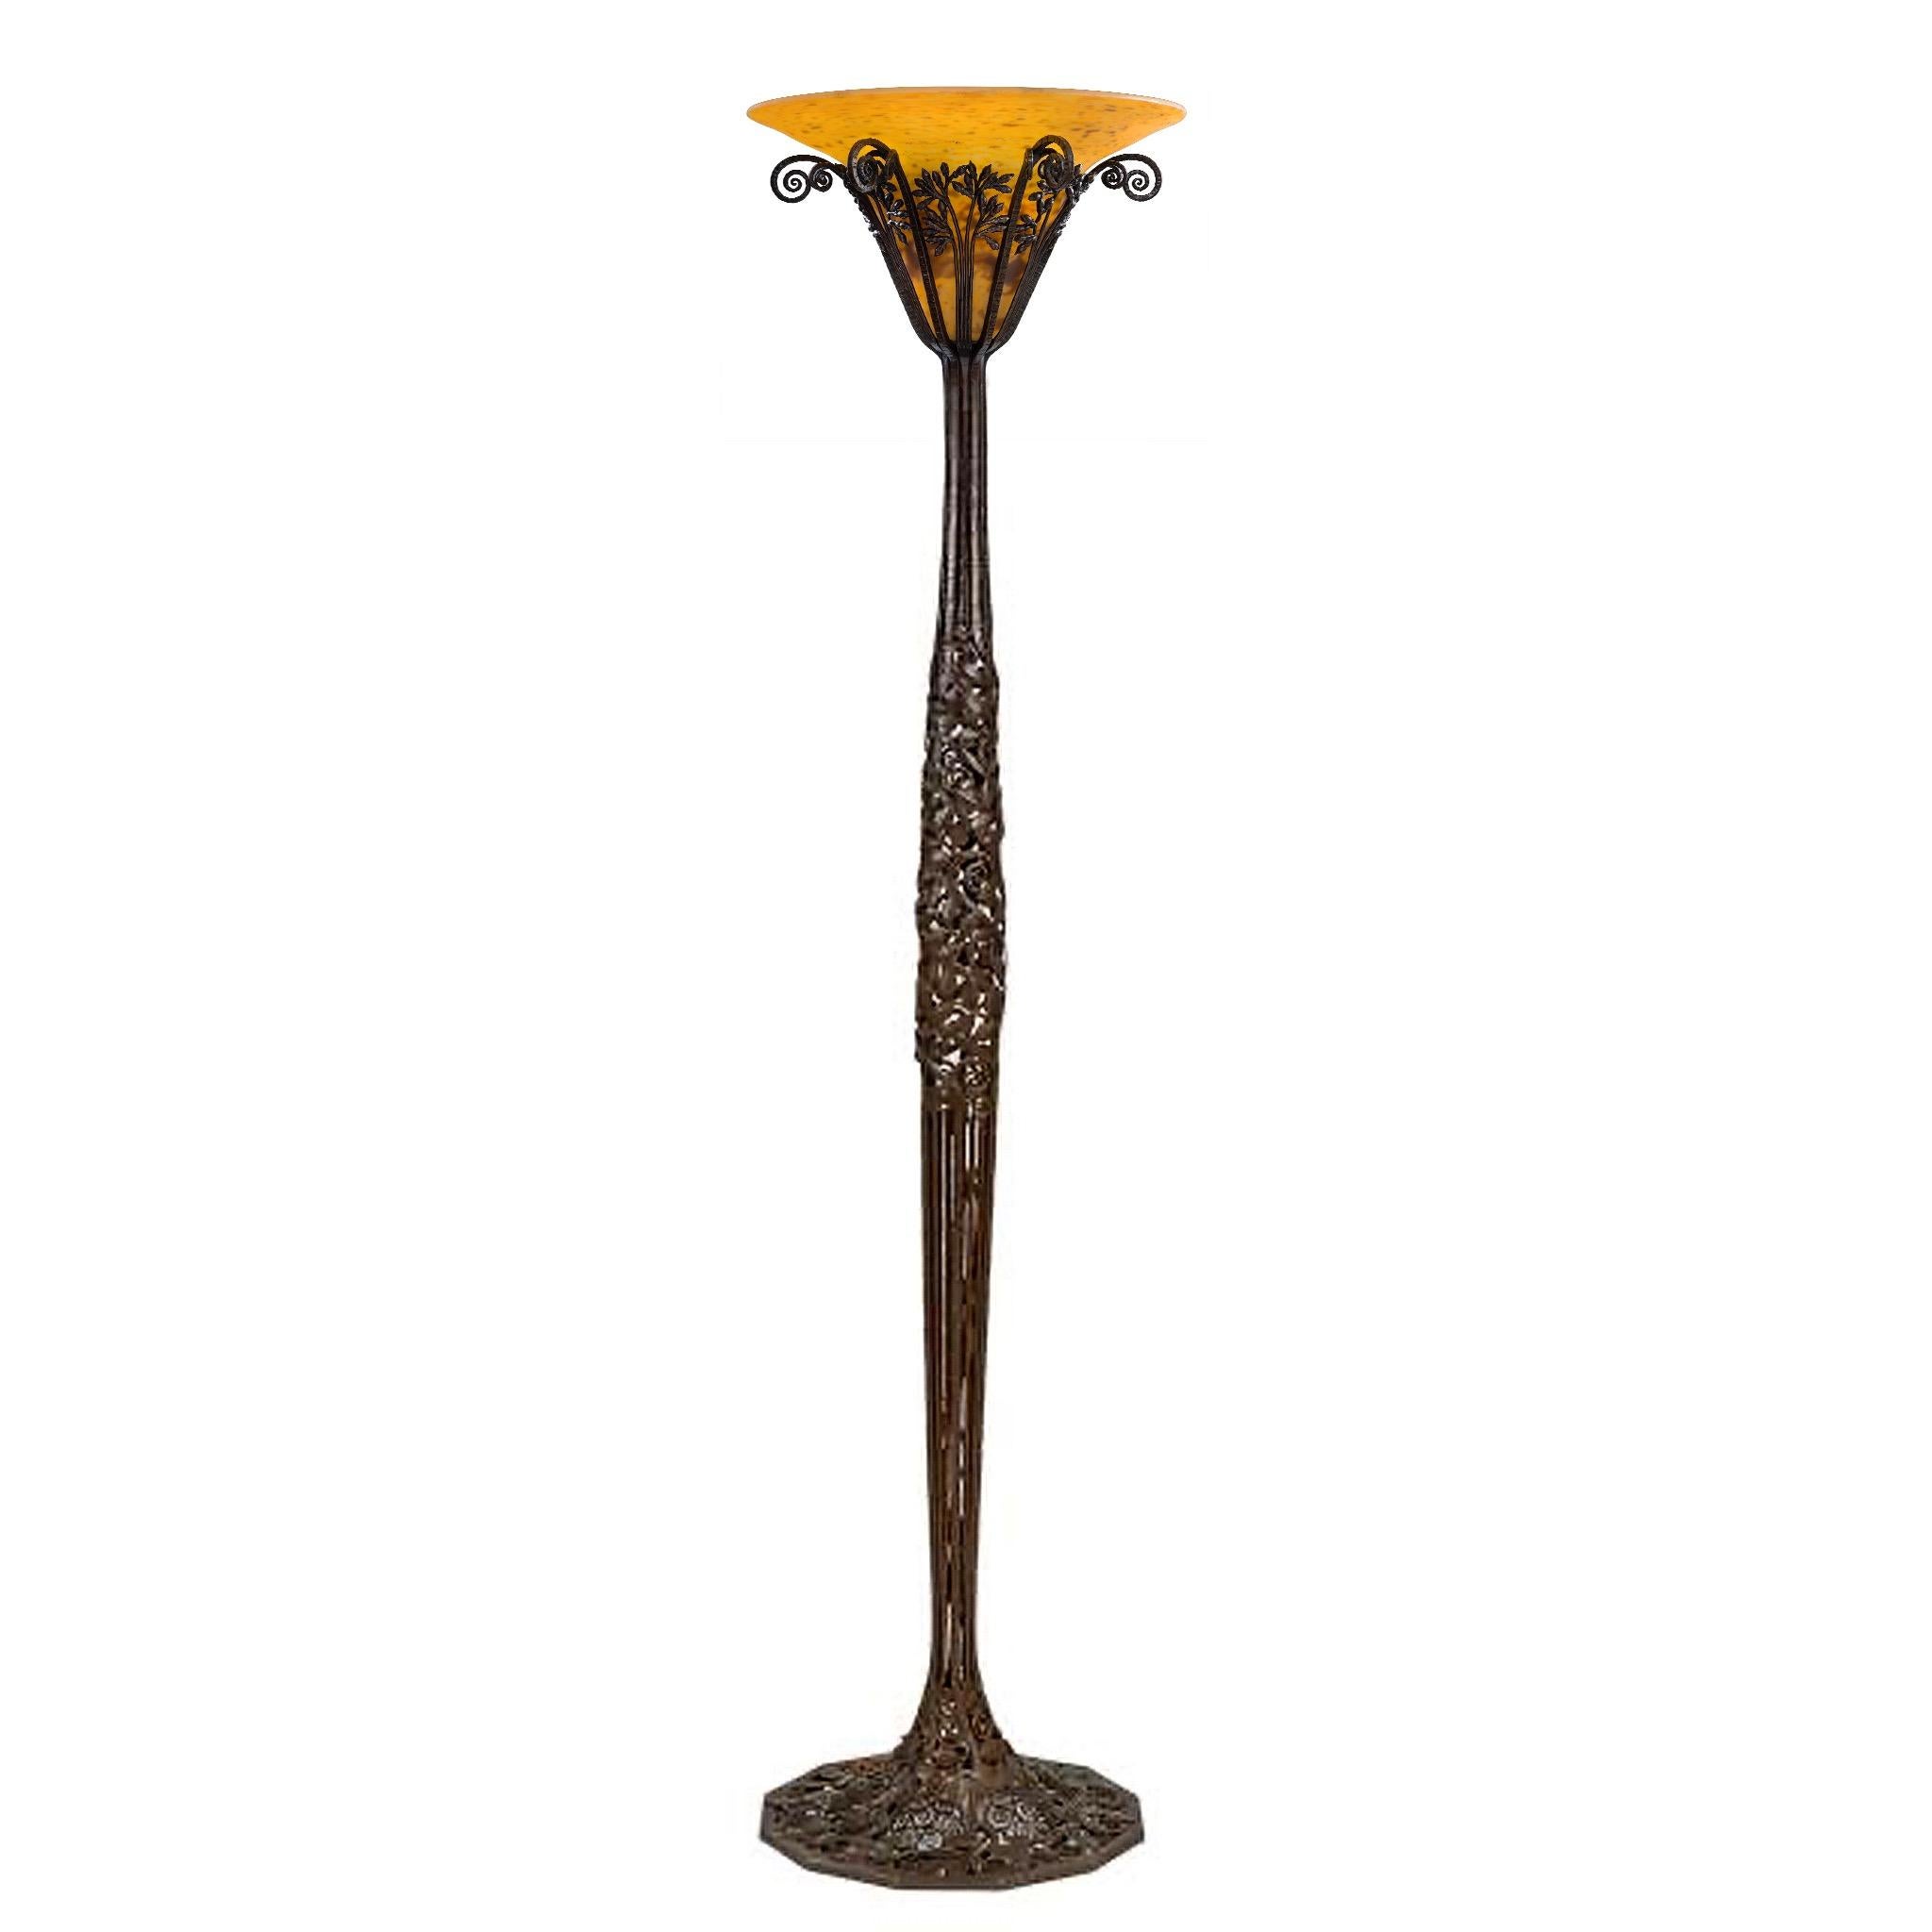 This wrought iron and glass “Les Roses” floor lamp by Edgar Brandt and Daum surprises and delights with its high Art Deco styling. A calyx of wild rose buds and stylized cabbage roses support an amber glass shade. Daum’s glass took inspiration from